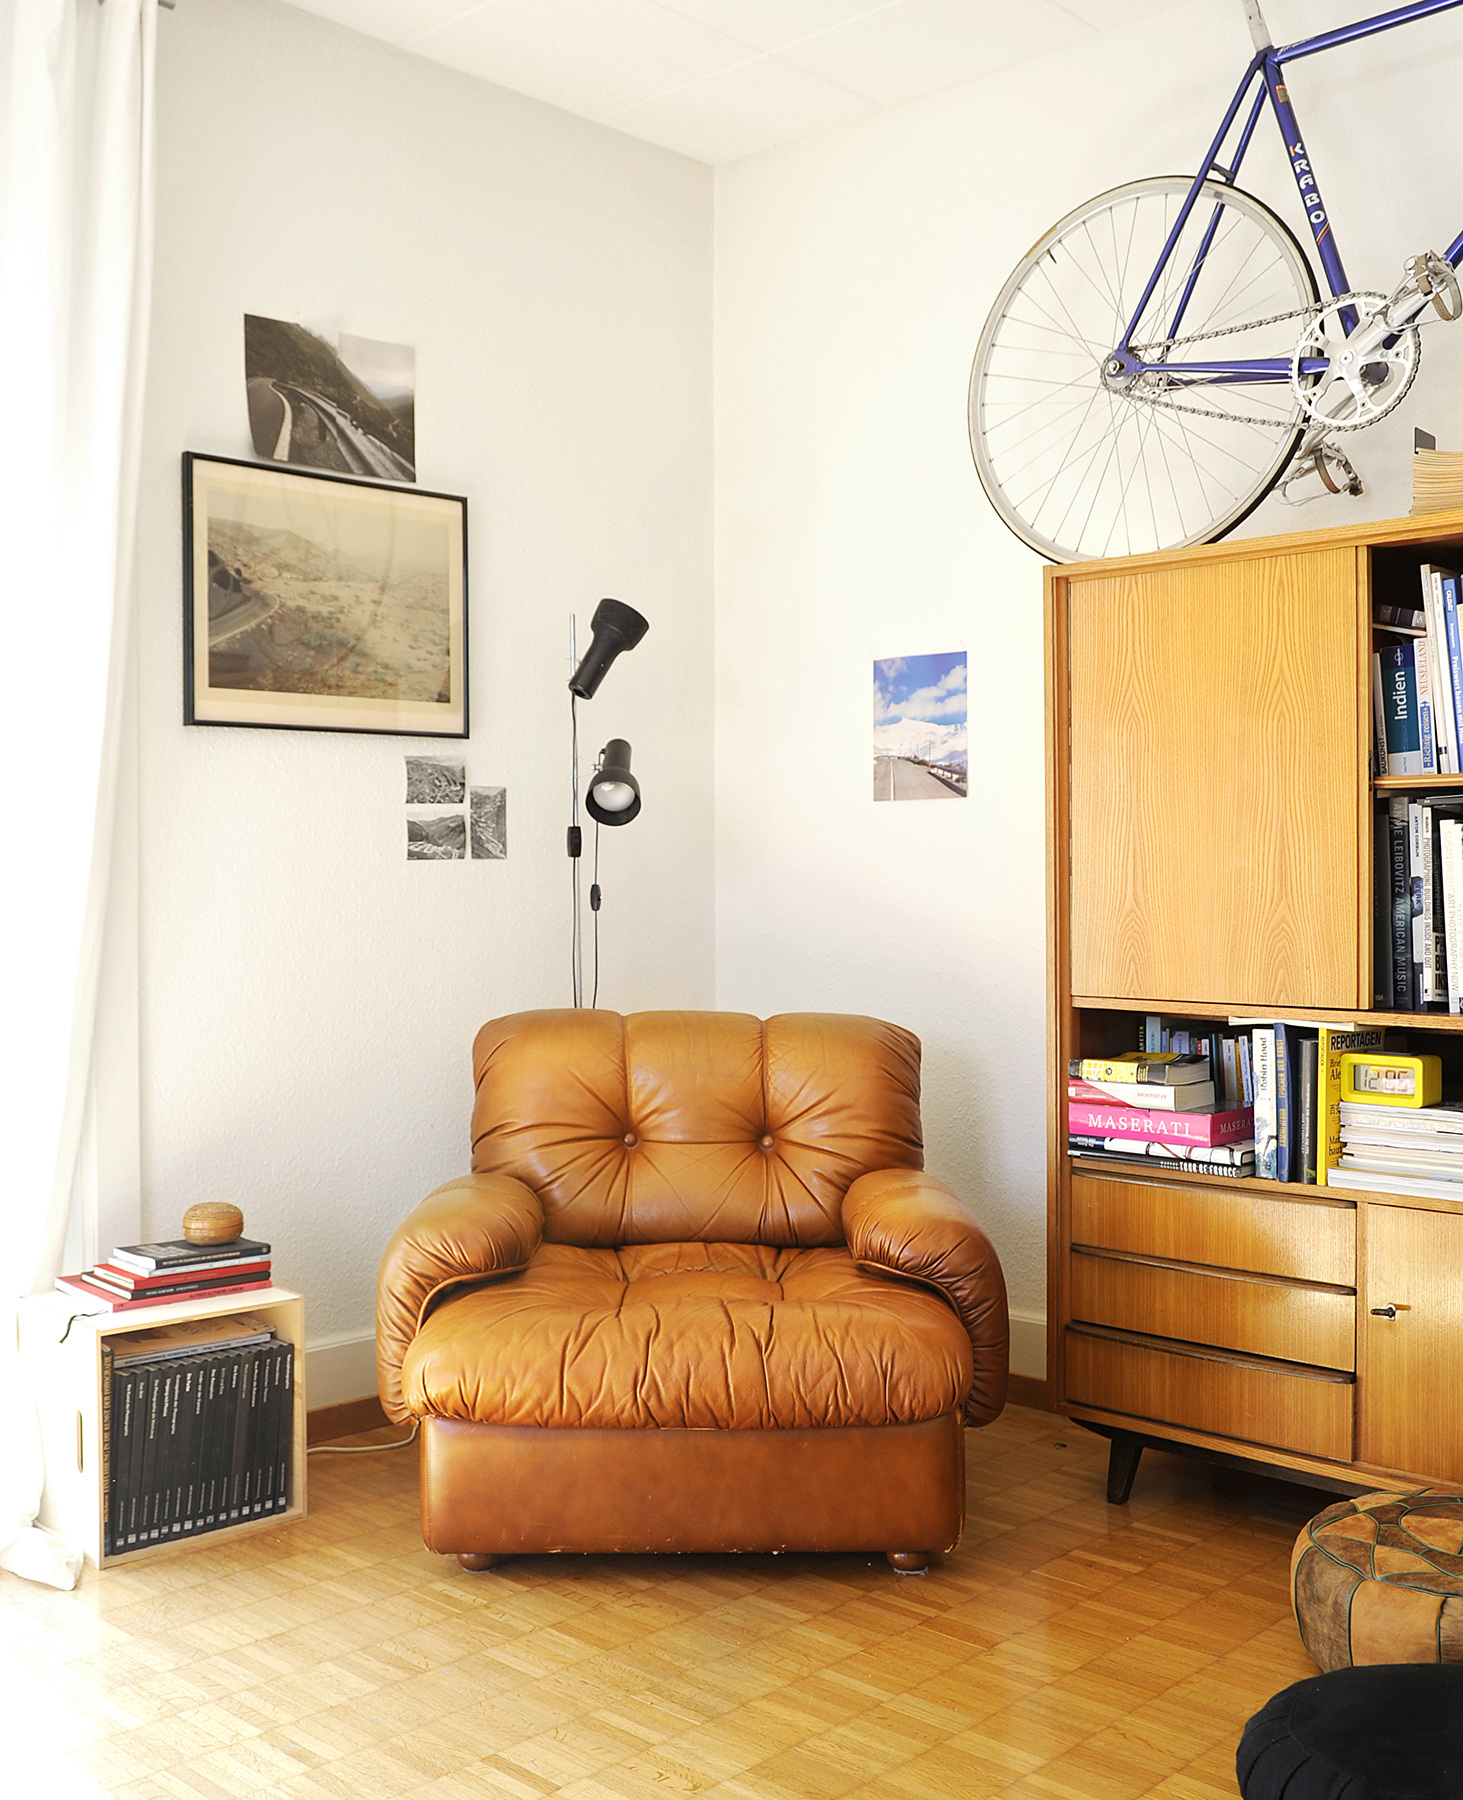 interior, design, architecture, furniture, lounge chair, leather, floor lamp, vintage, bicycle, 